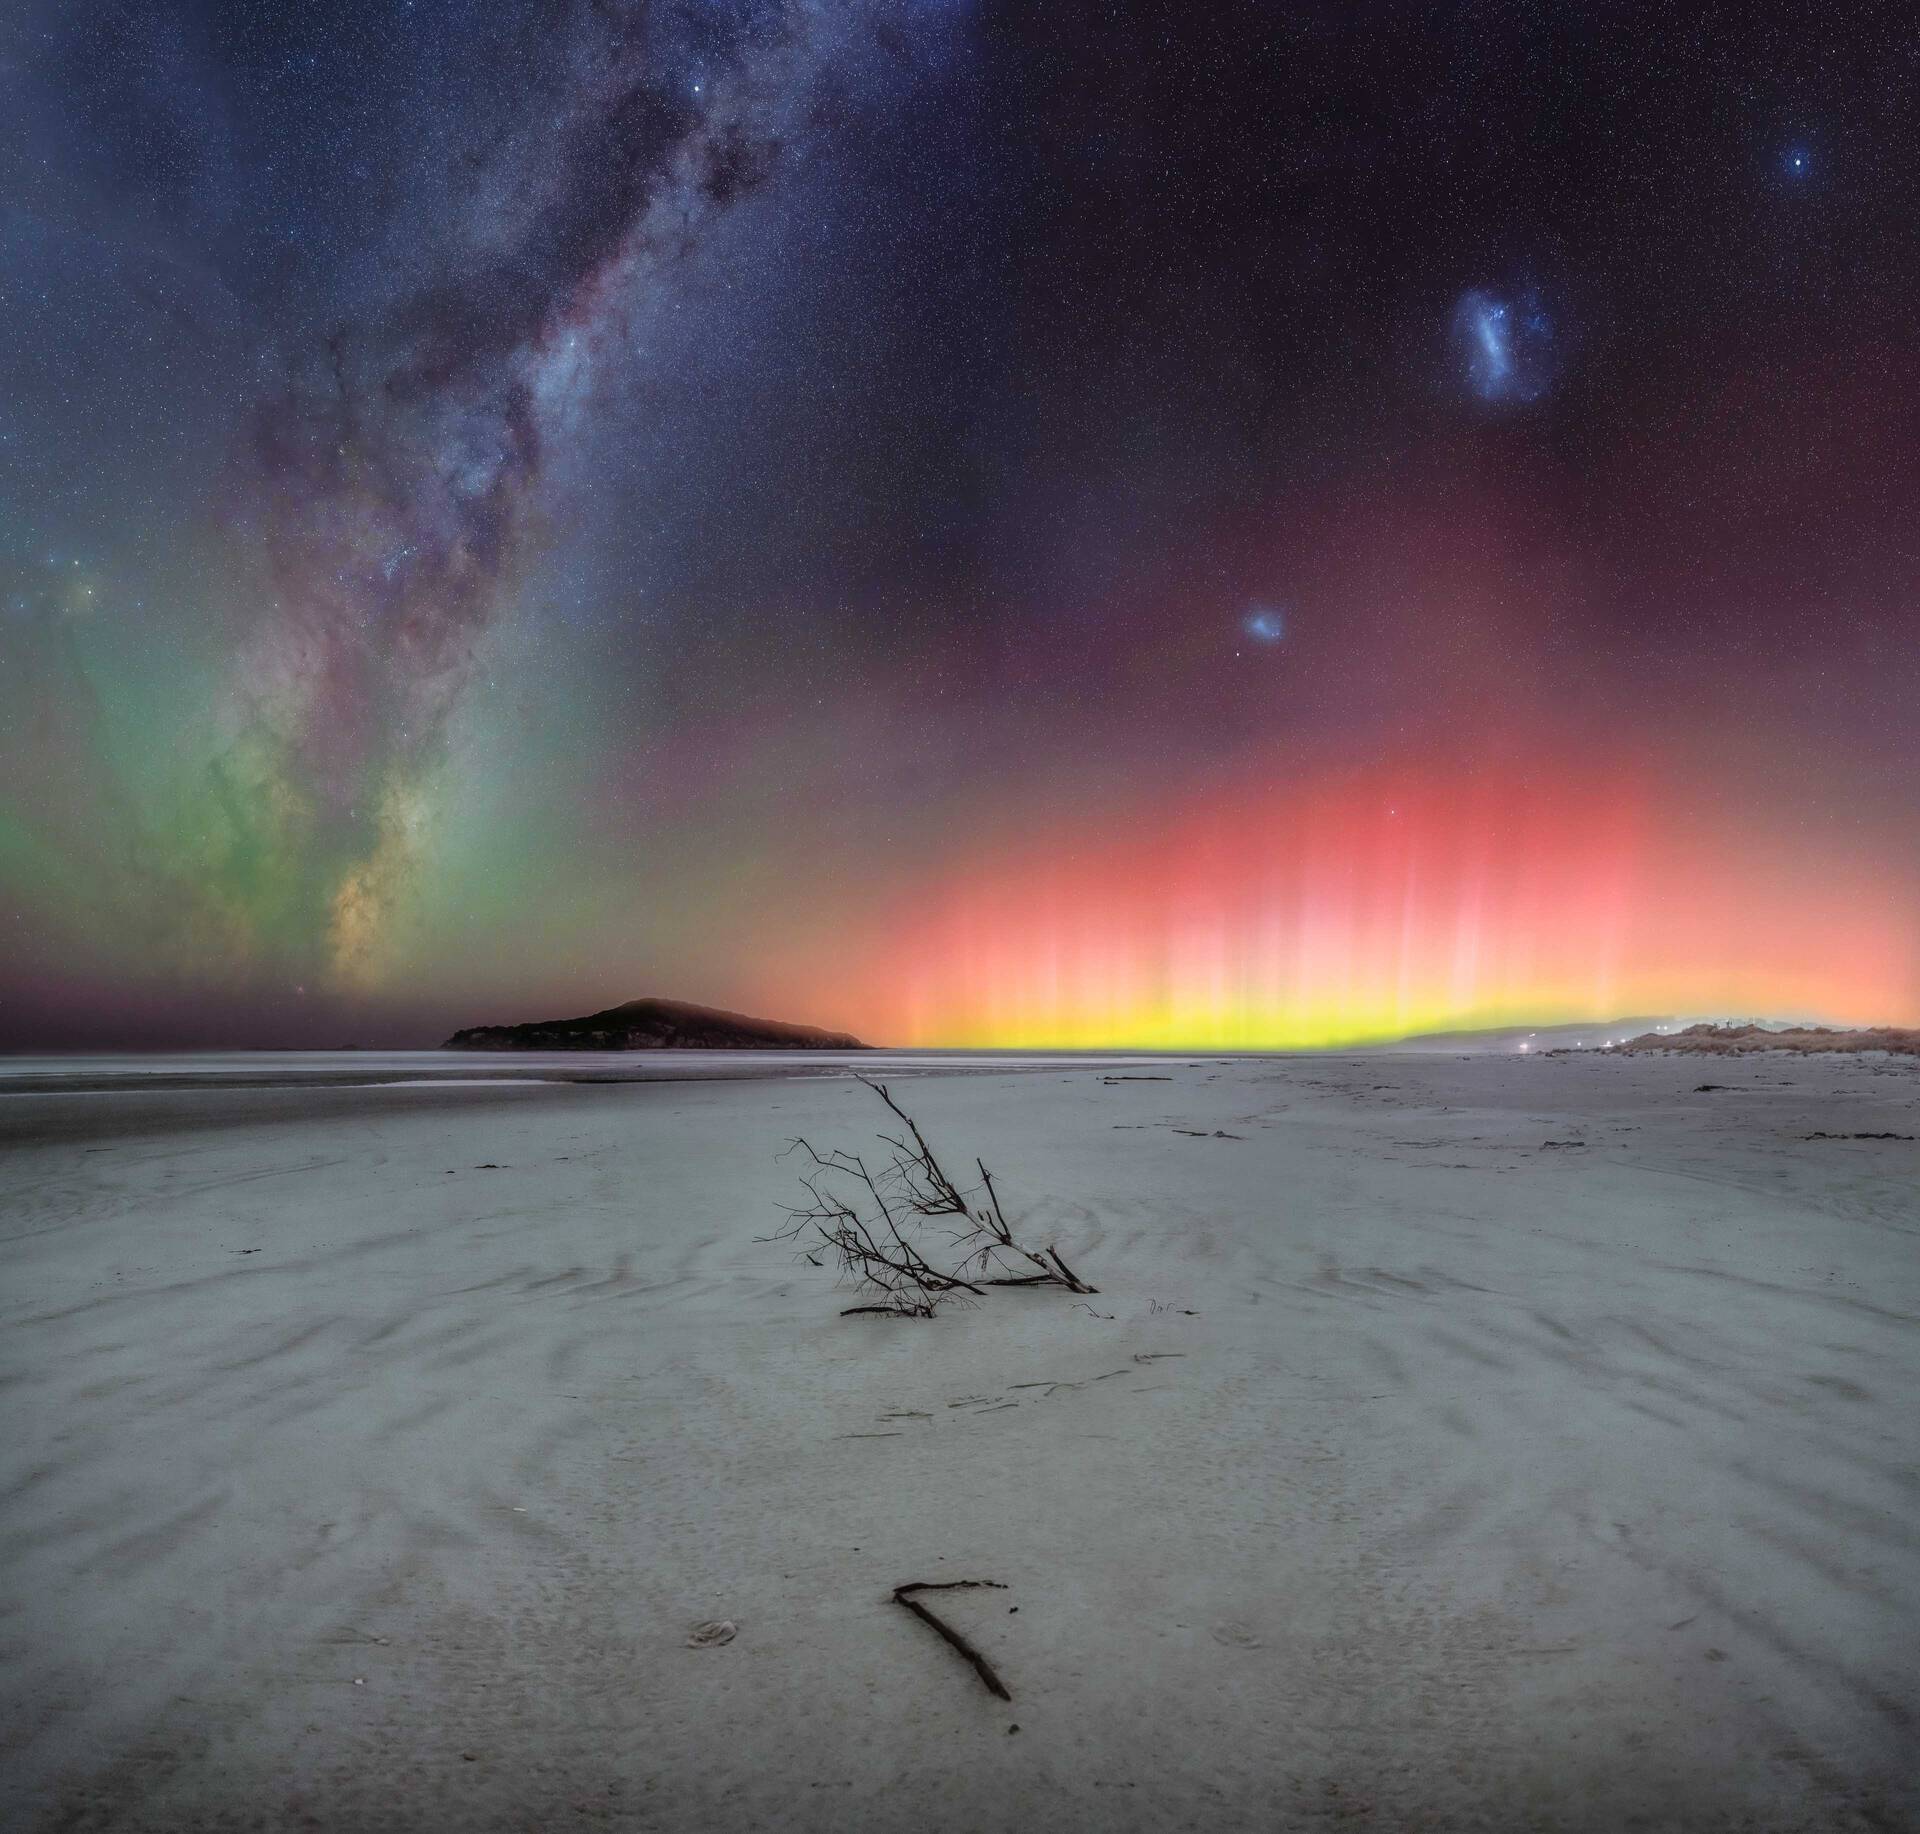 Milky Way core dominating the night sky alongside the Magellanic Clouds and a bright red Aurora